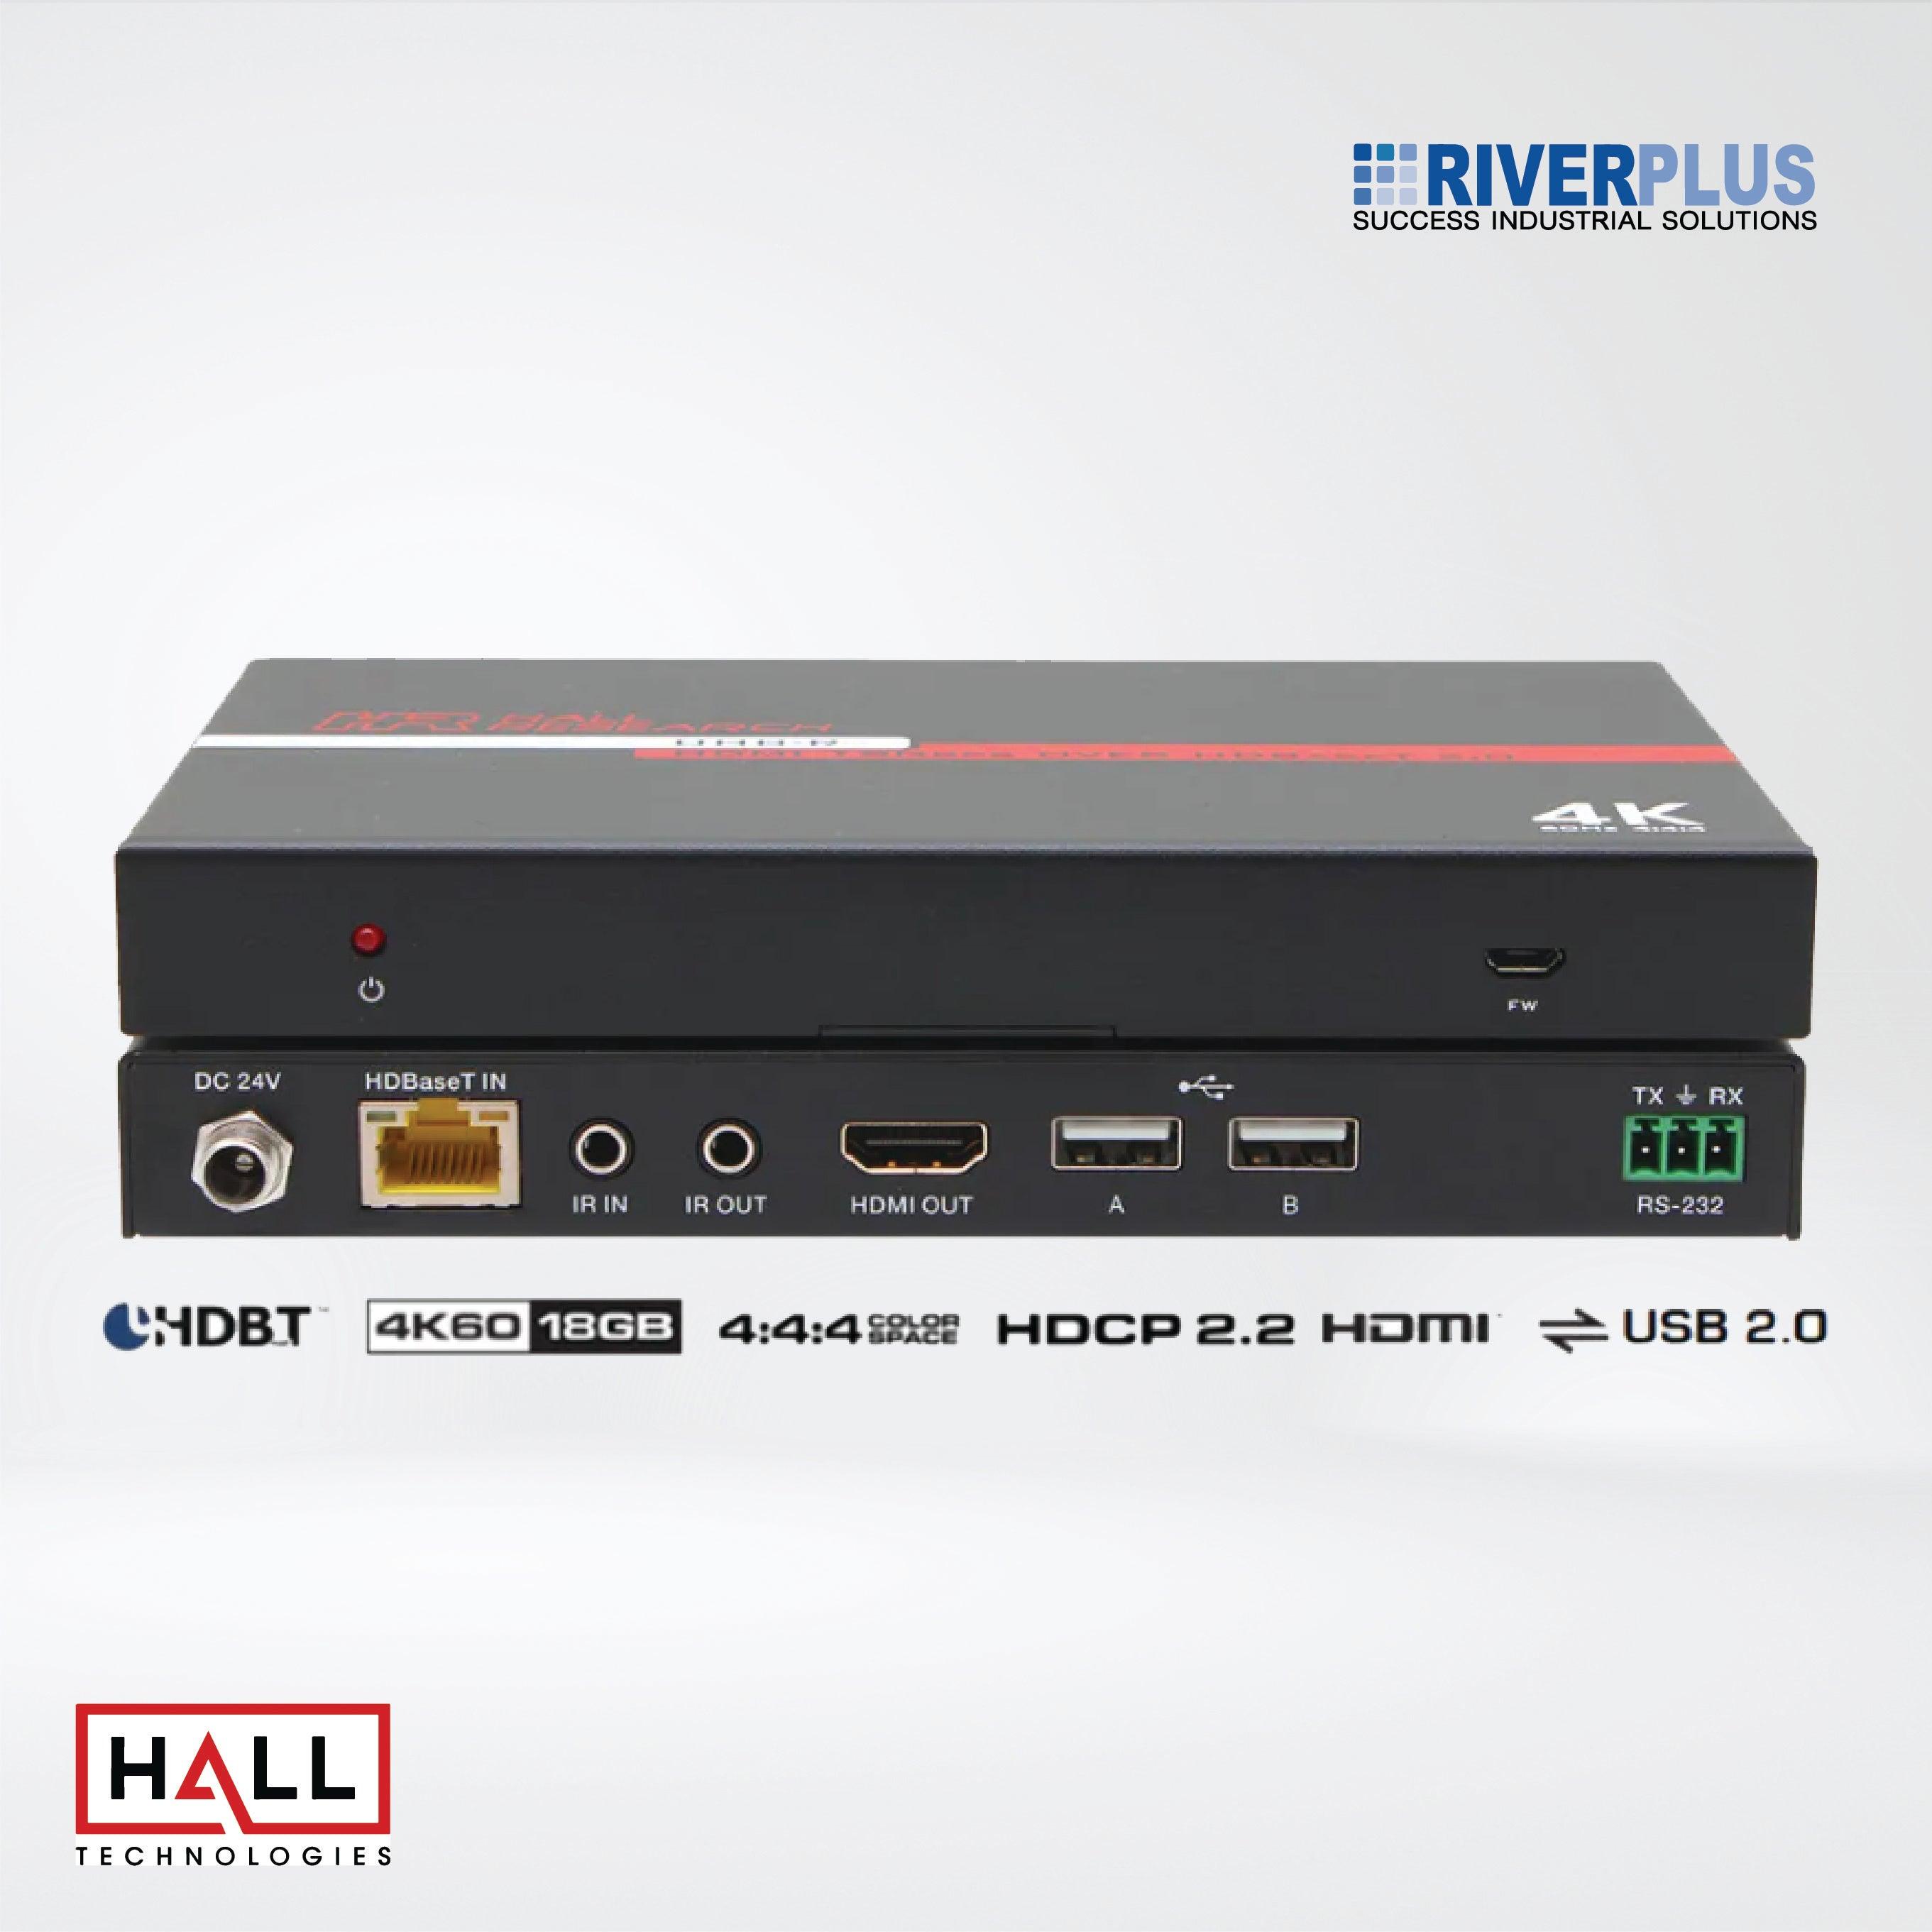 UHB-R Auto-Switching HDMI, VGA and USB Extension System - Riverplus